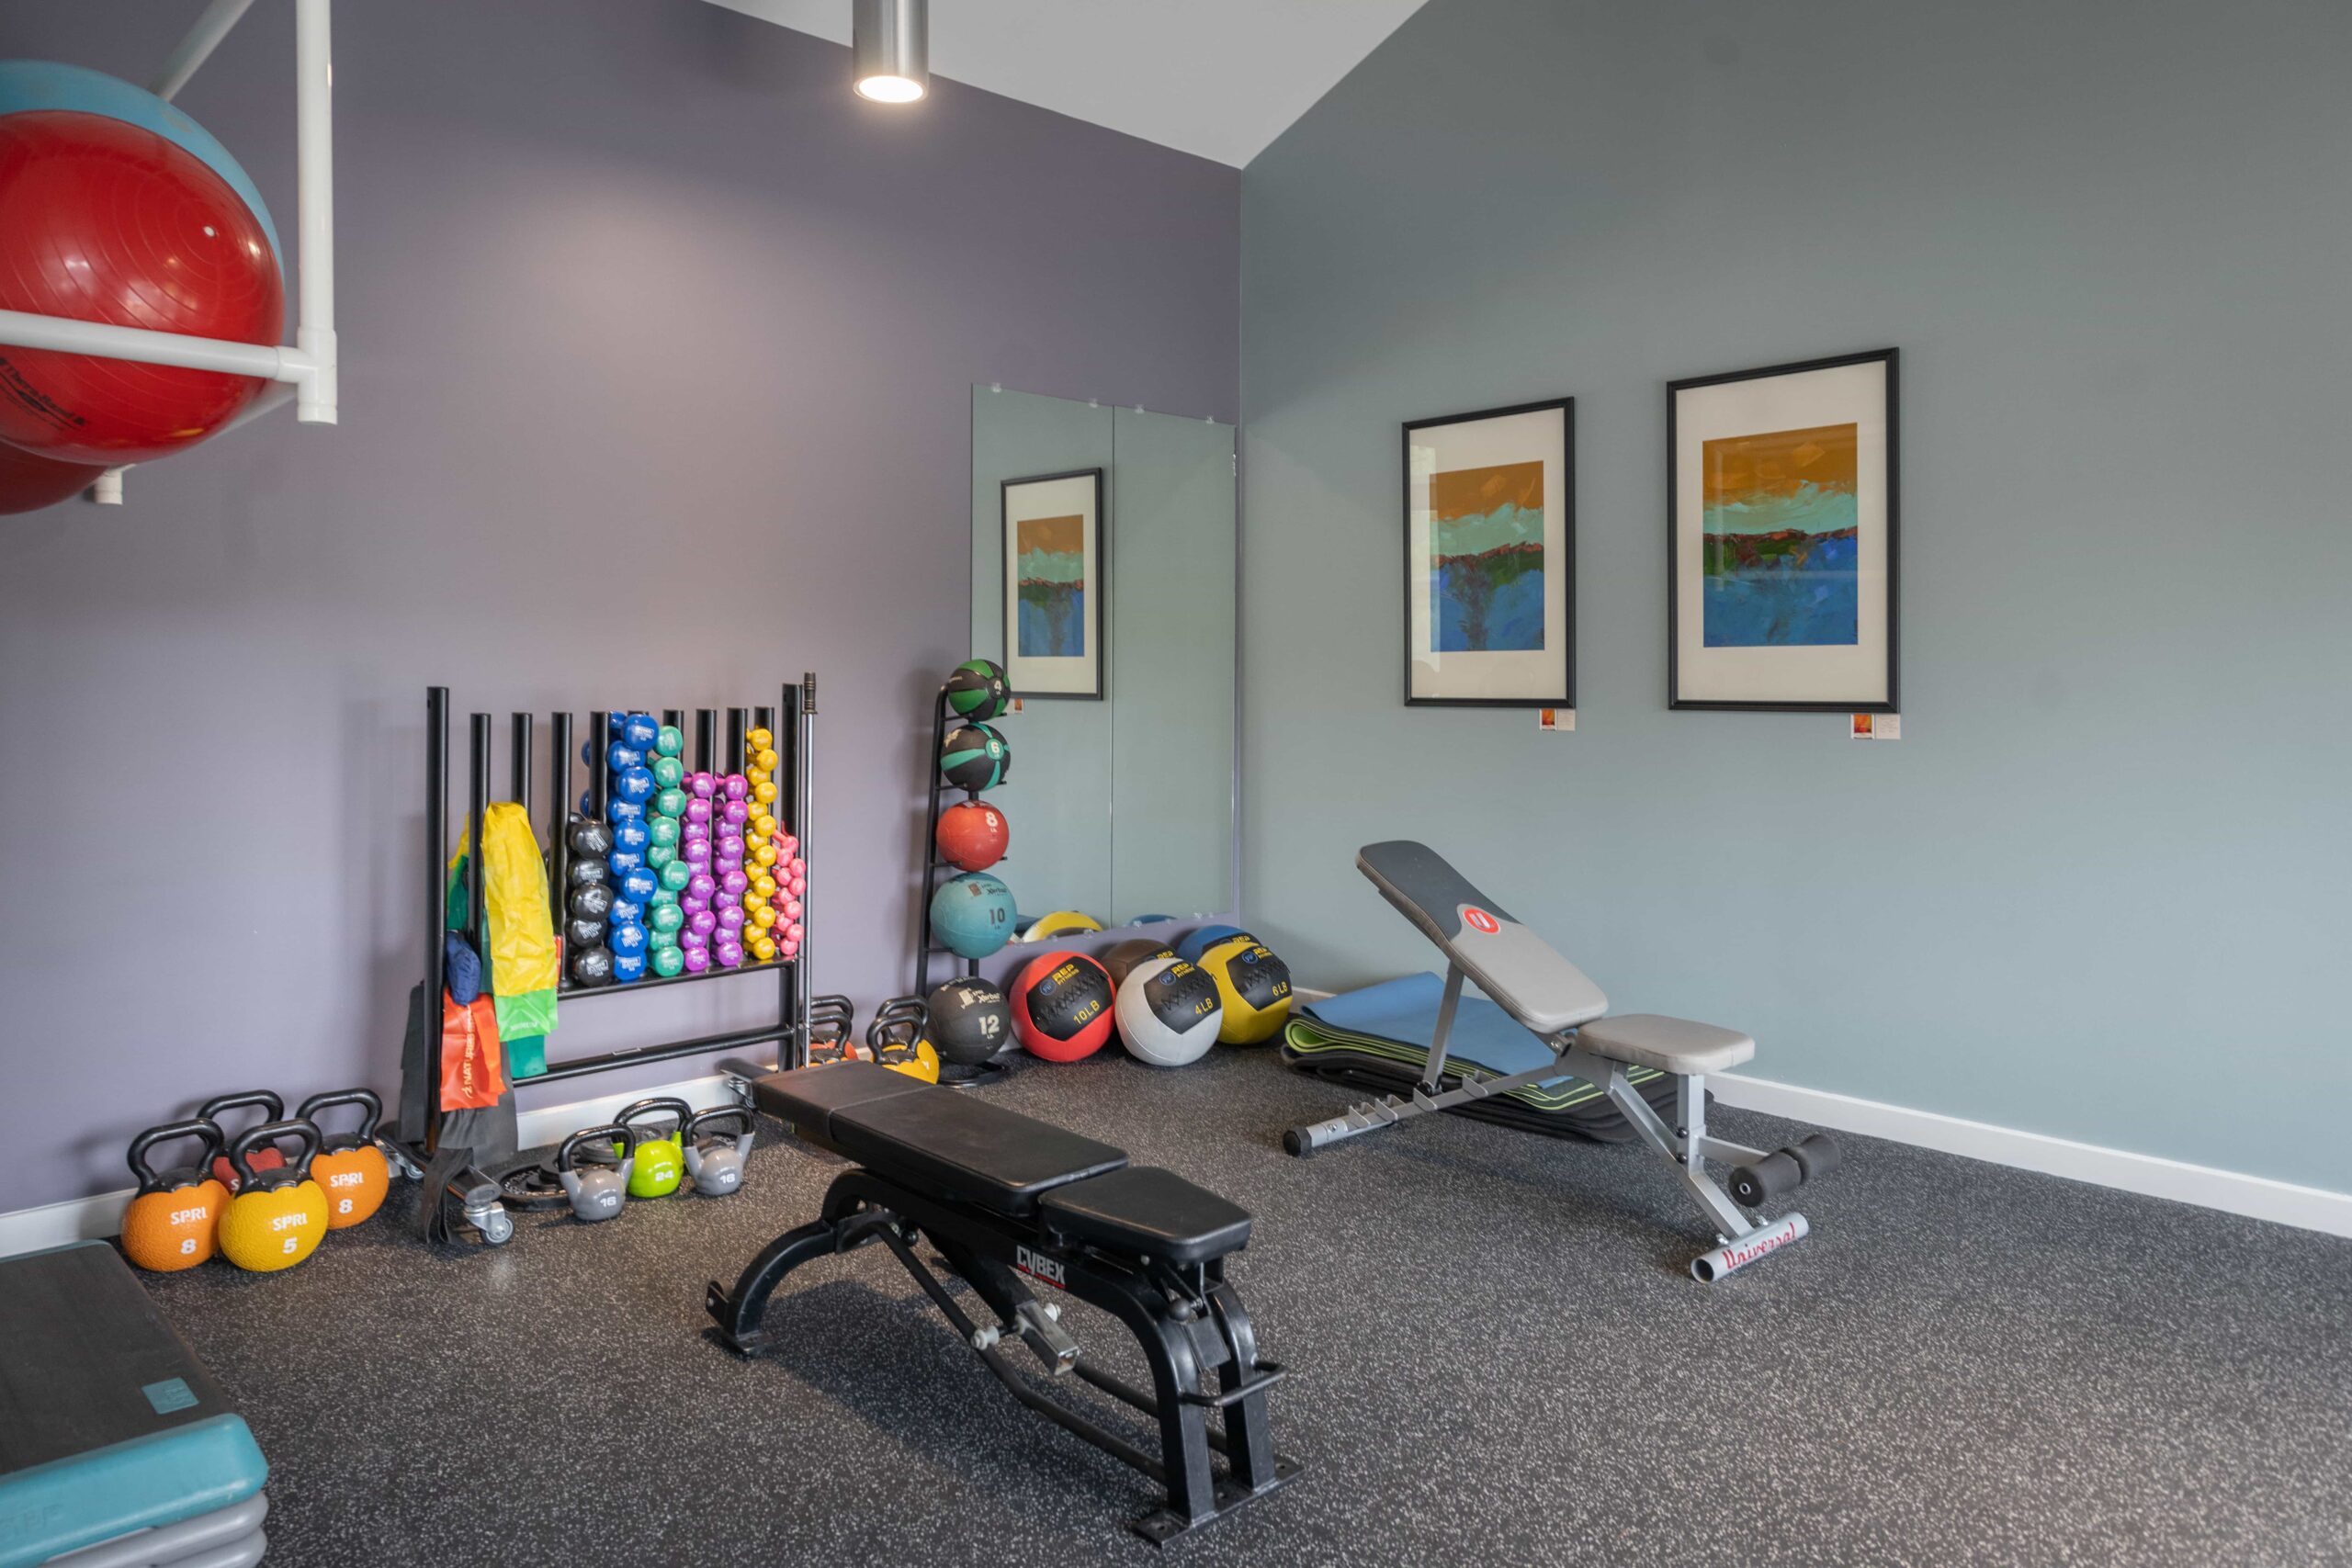 Exercise room with hand weights, benches and other exercise equipment